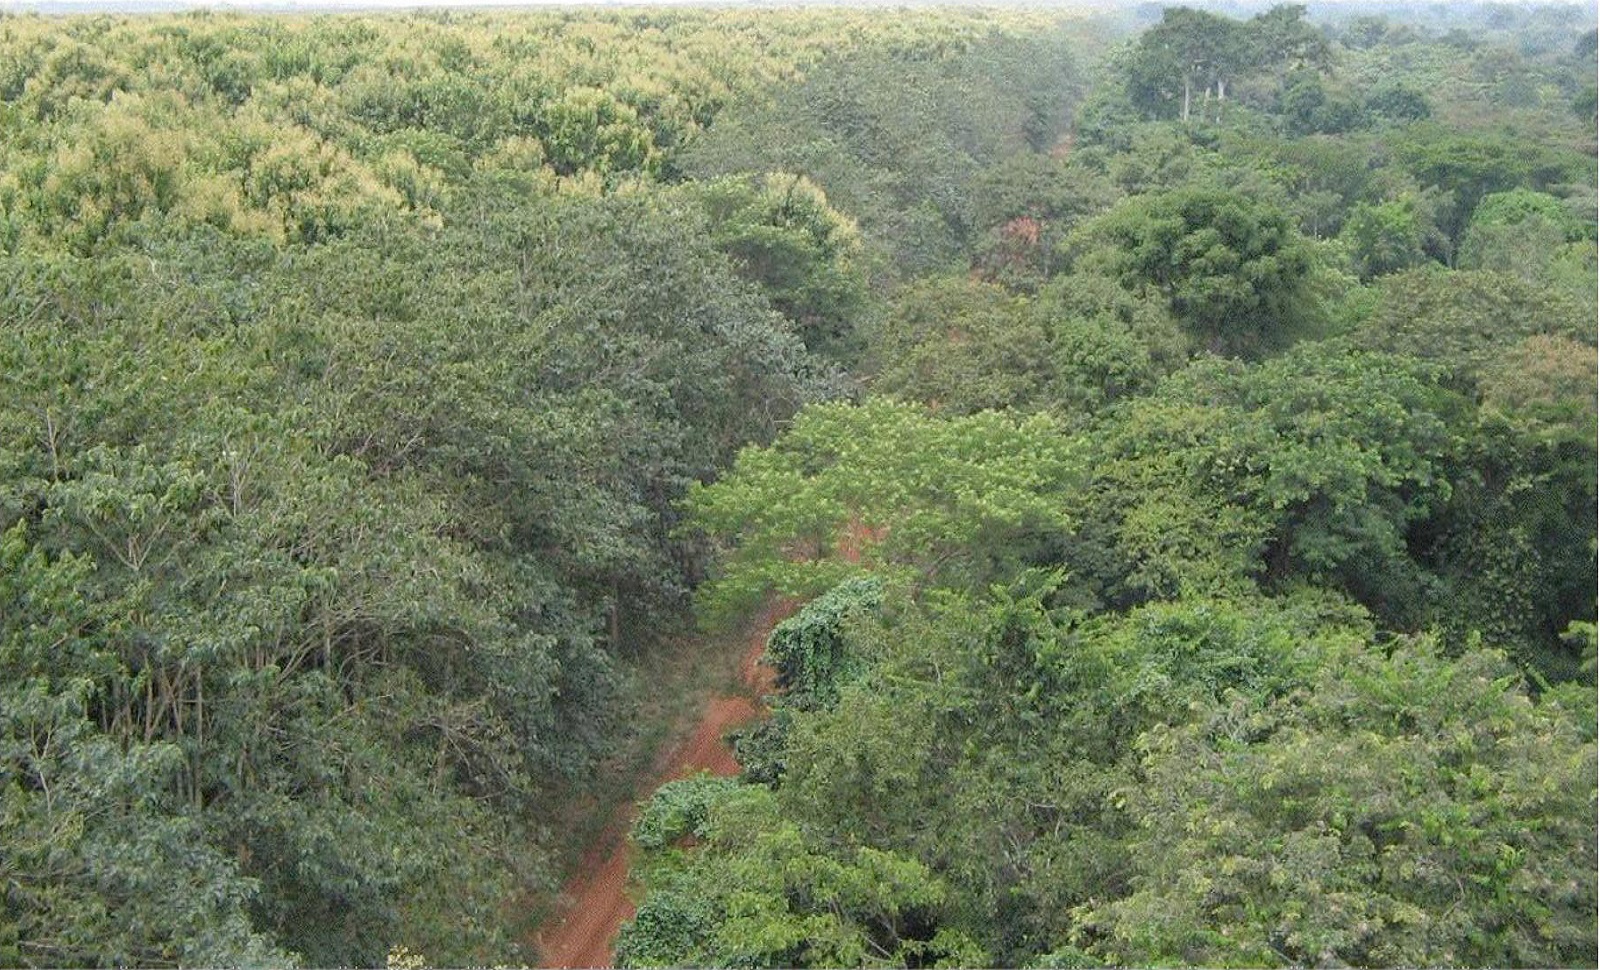 Benin: The Forest Of Parakou Undergoes A Reduction Of Its Perimeter